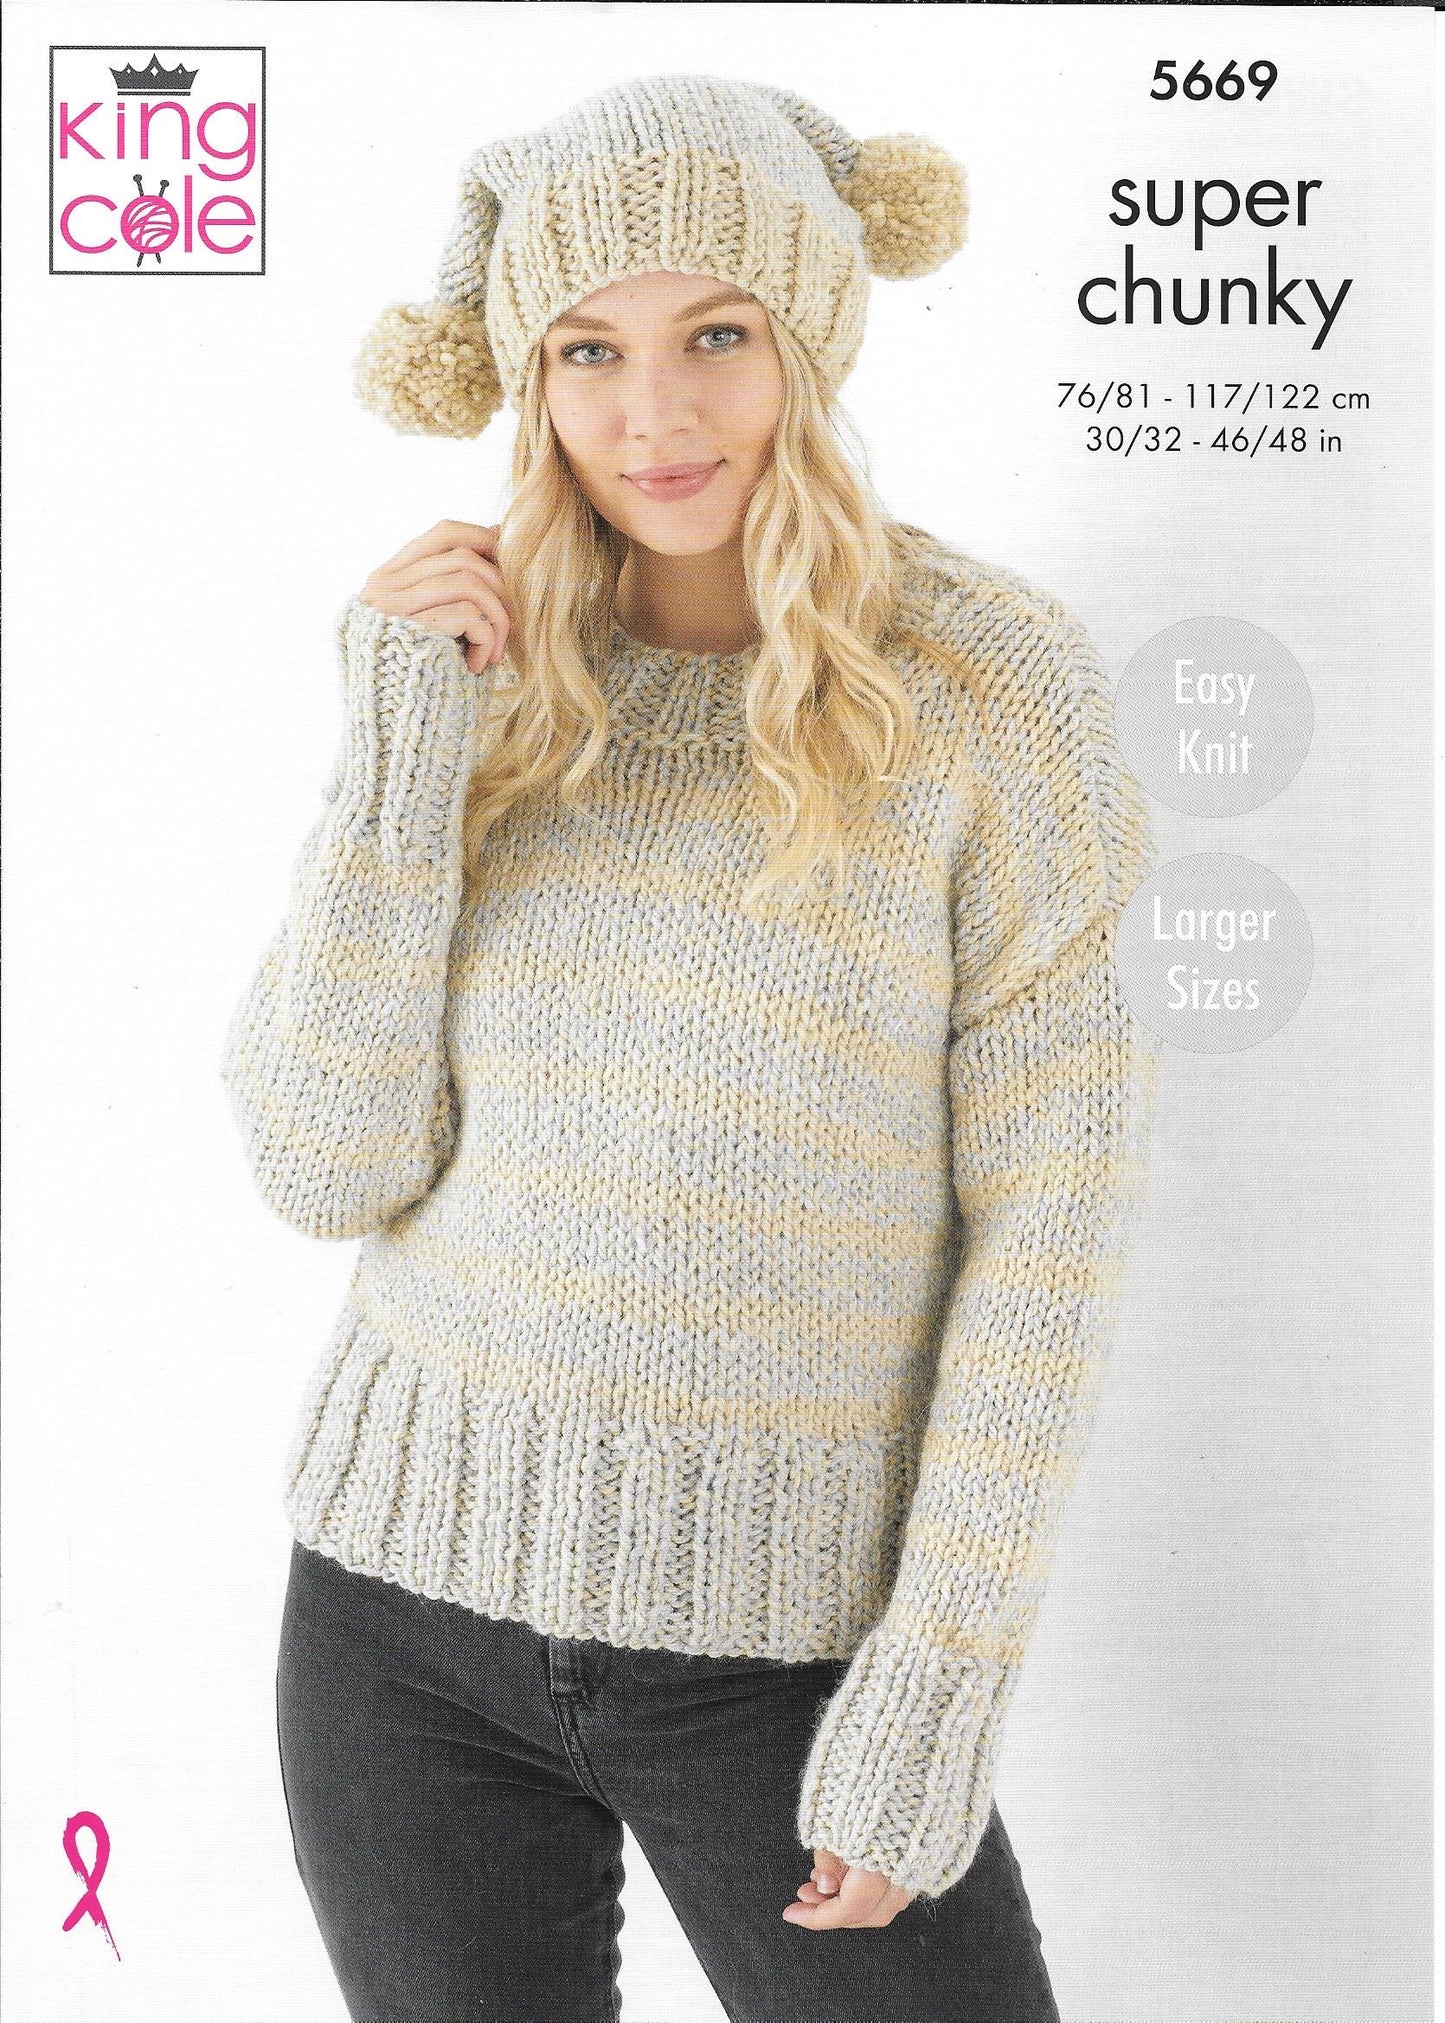 5669 King Cole Timeless Classic Super Chunky ladies sweater, hat and scarf knitting pattern